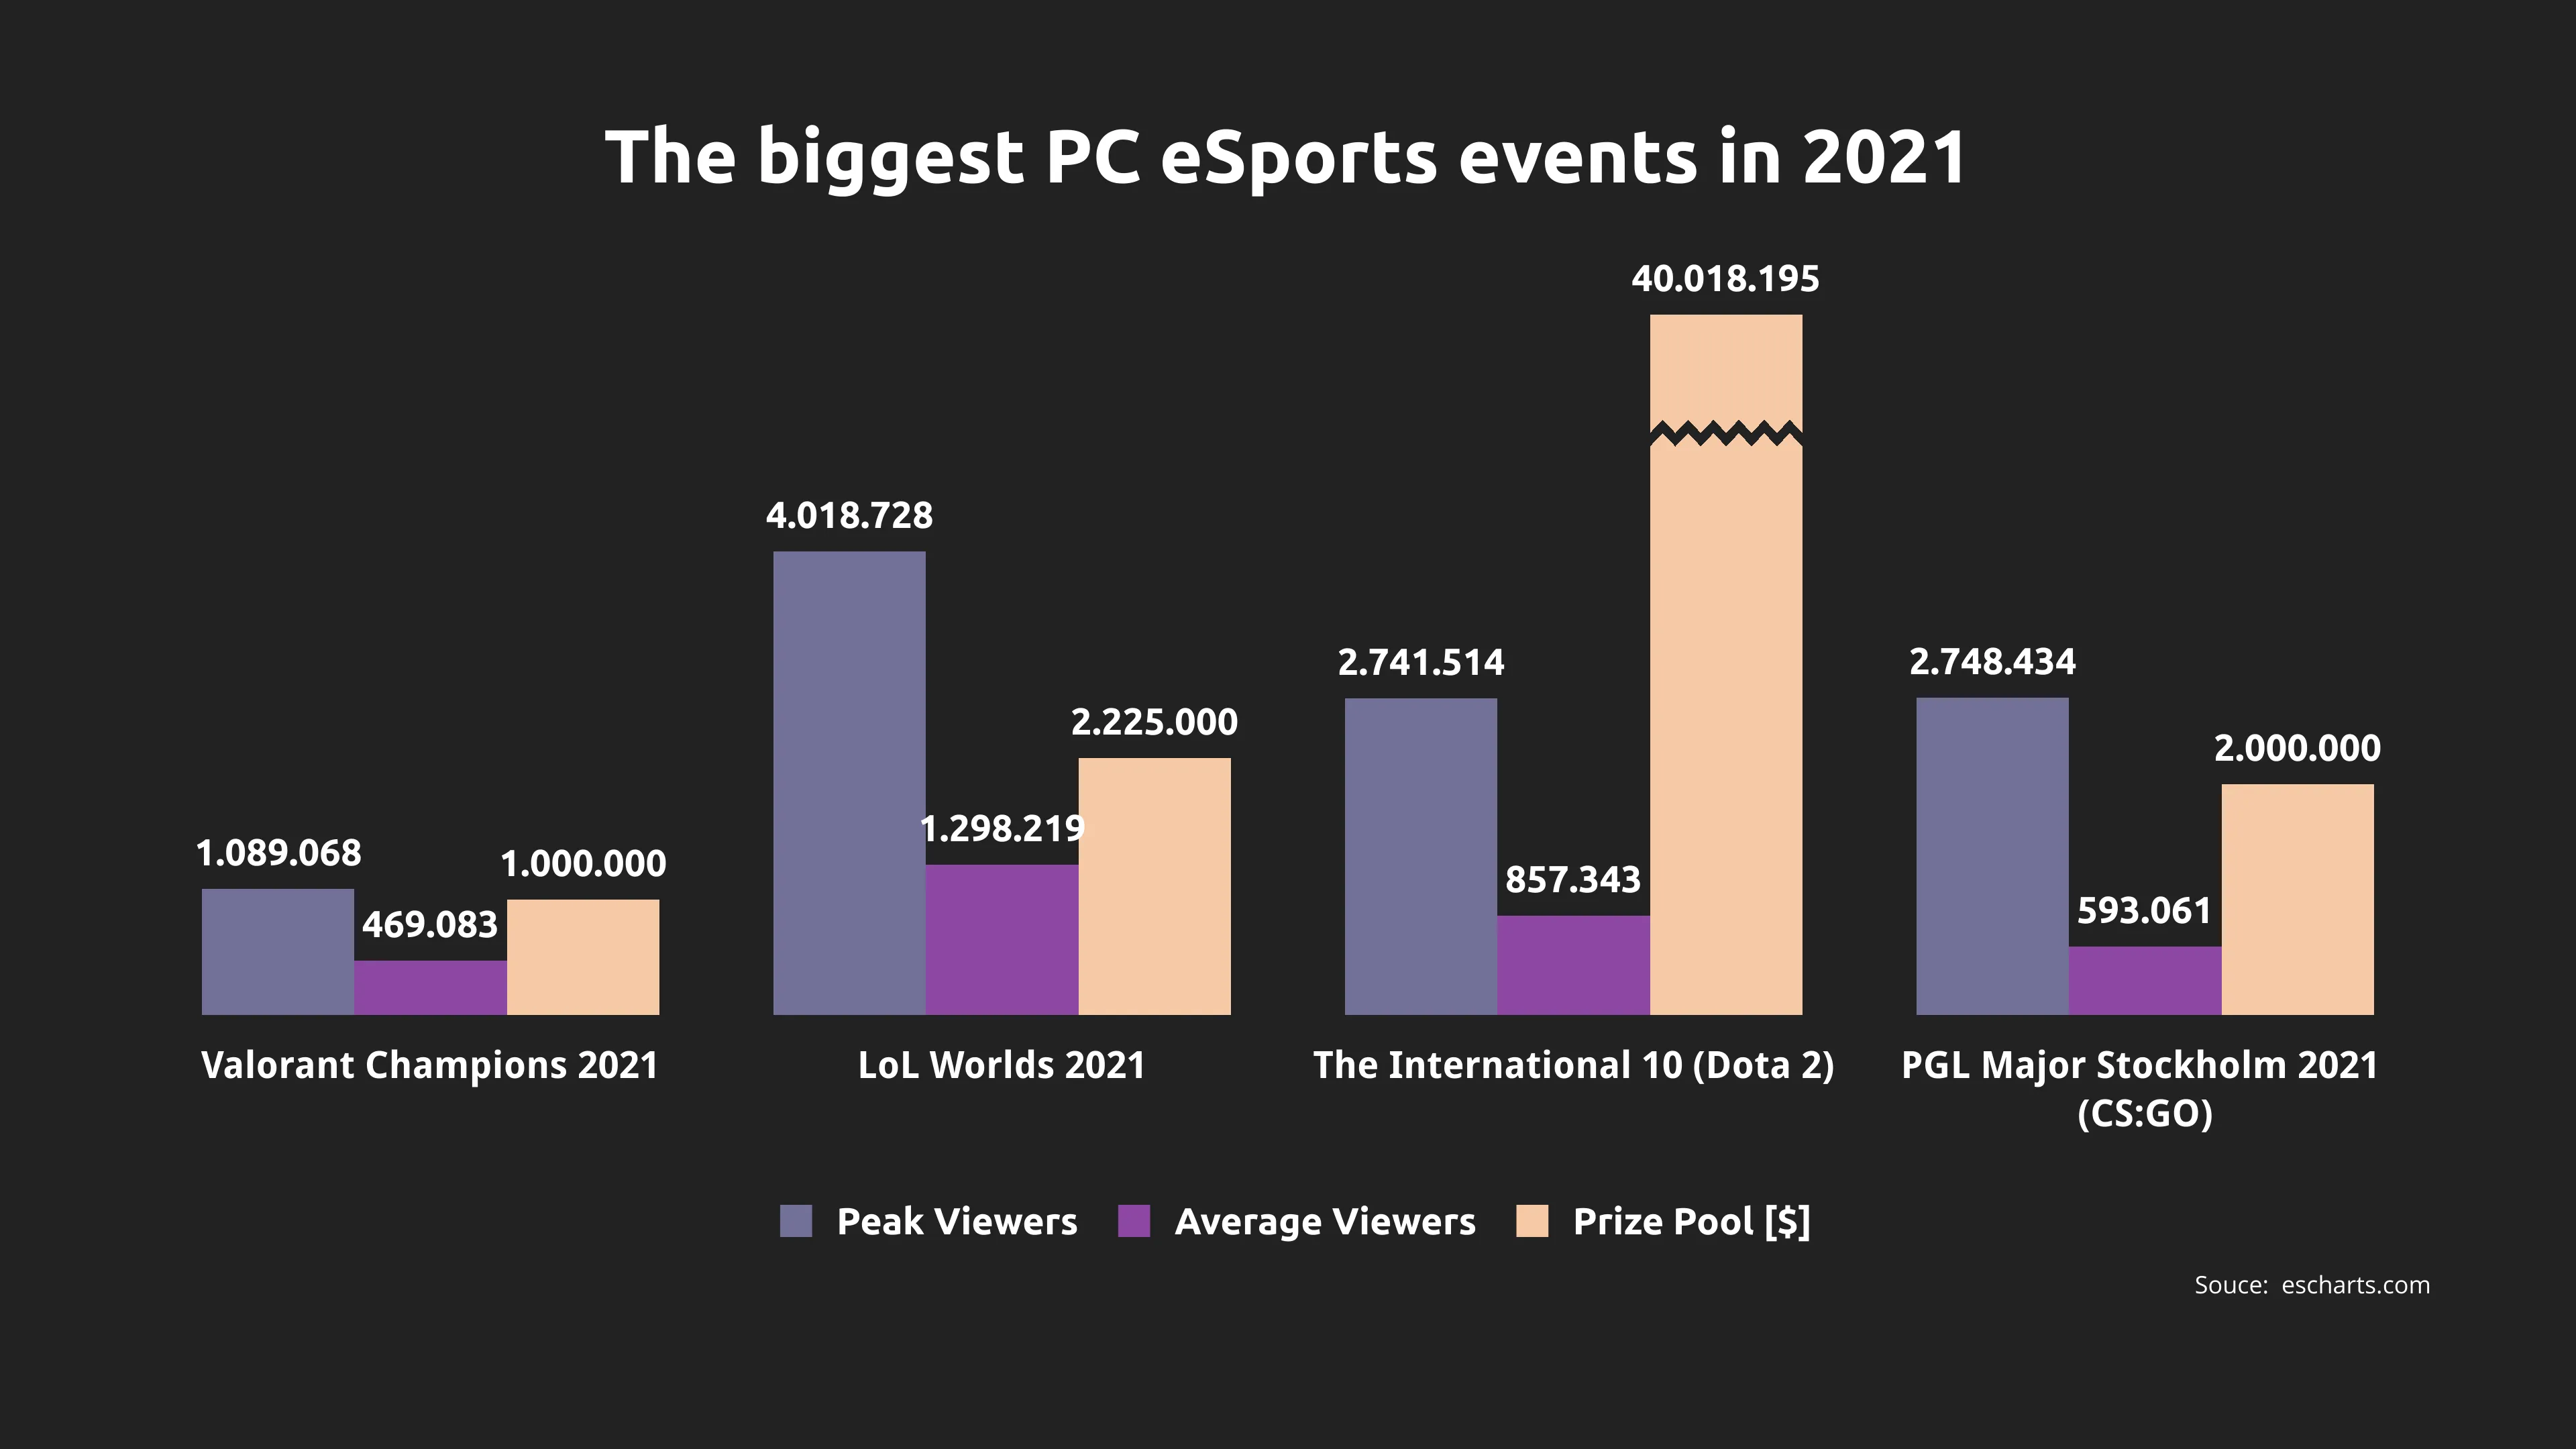 The biggest PC eSports events in 2021